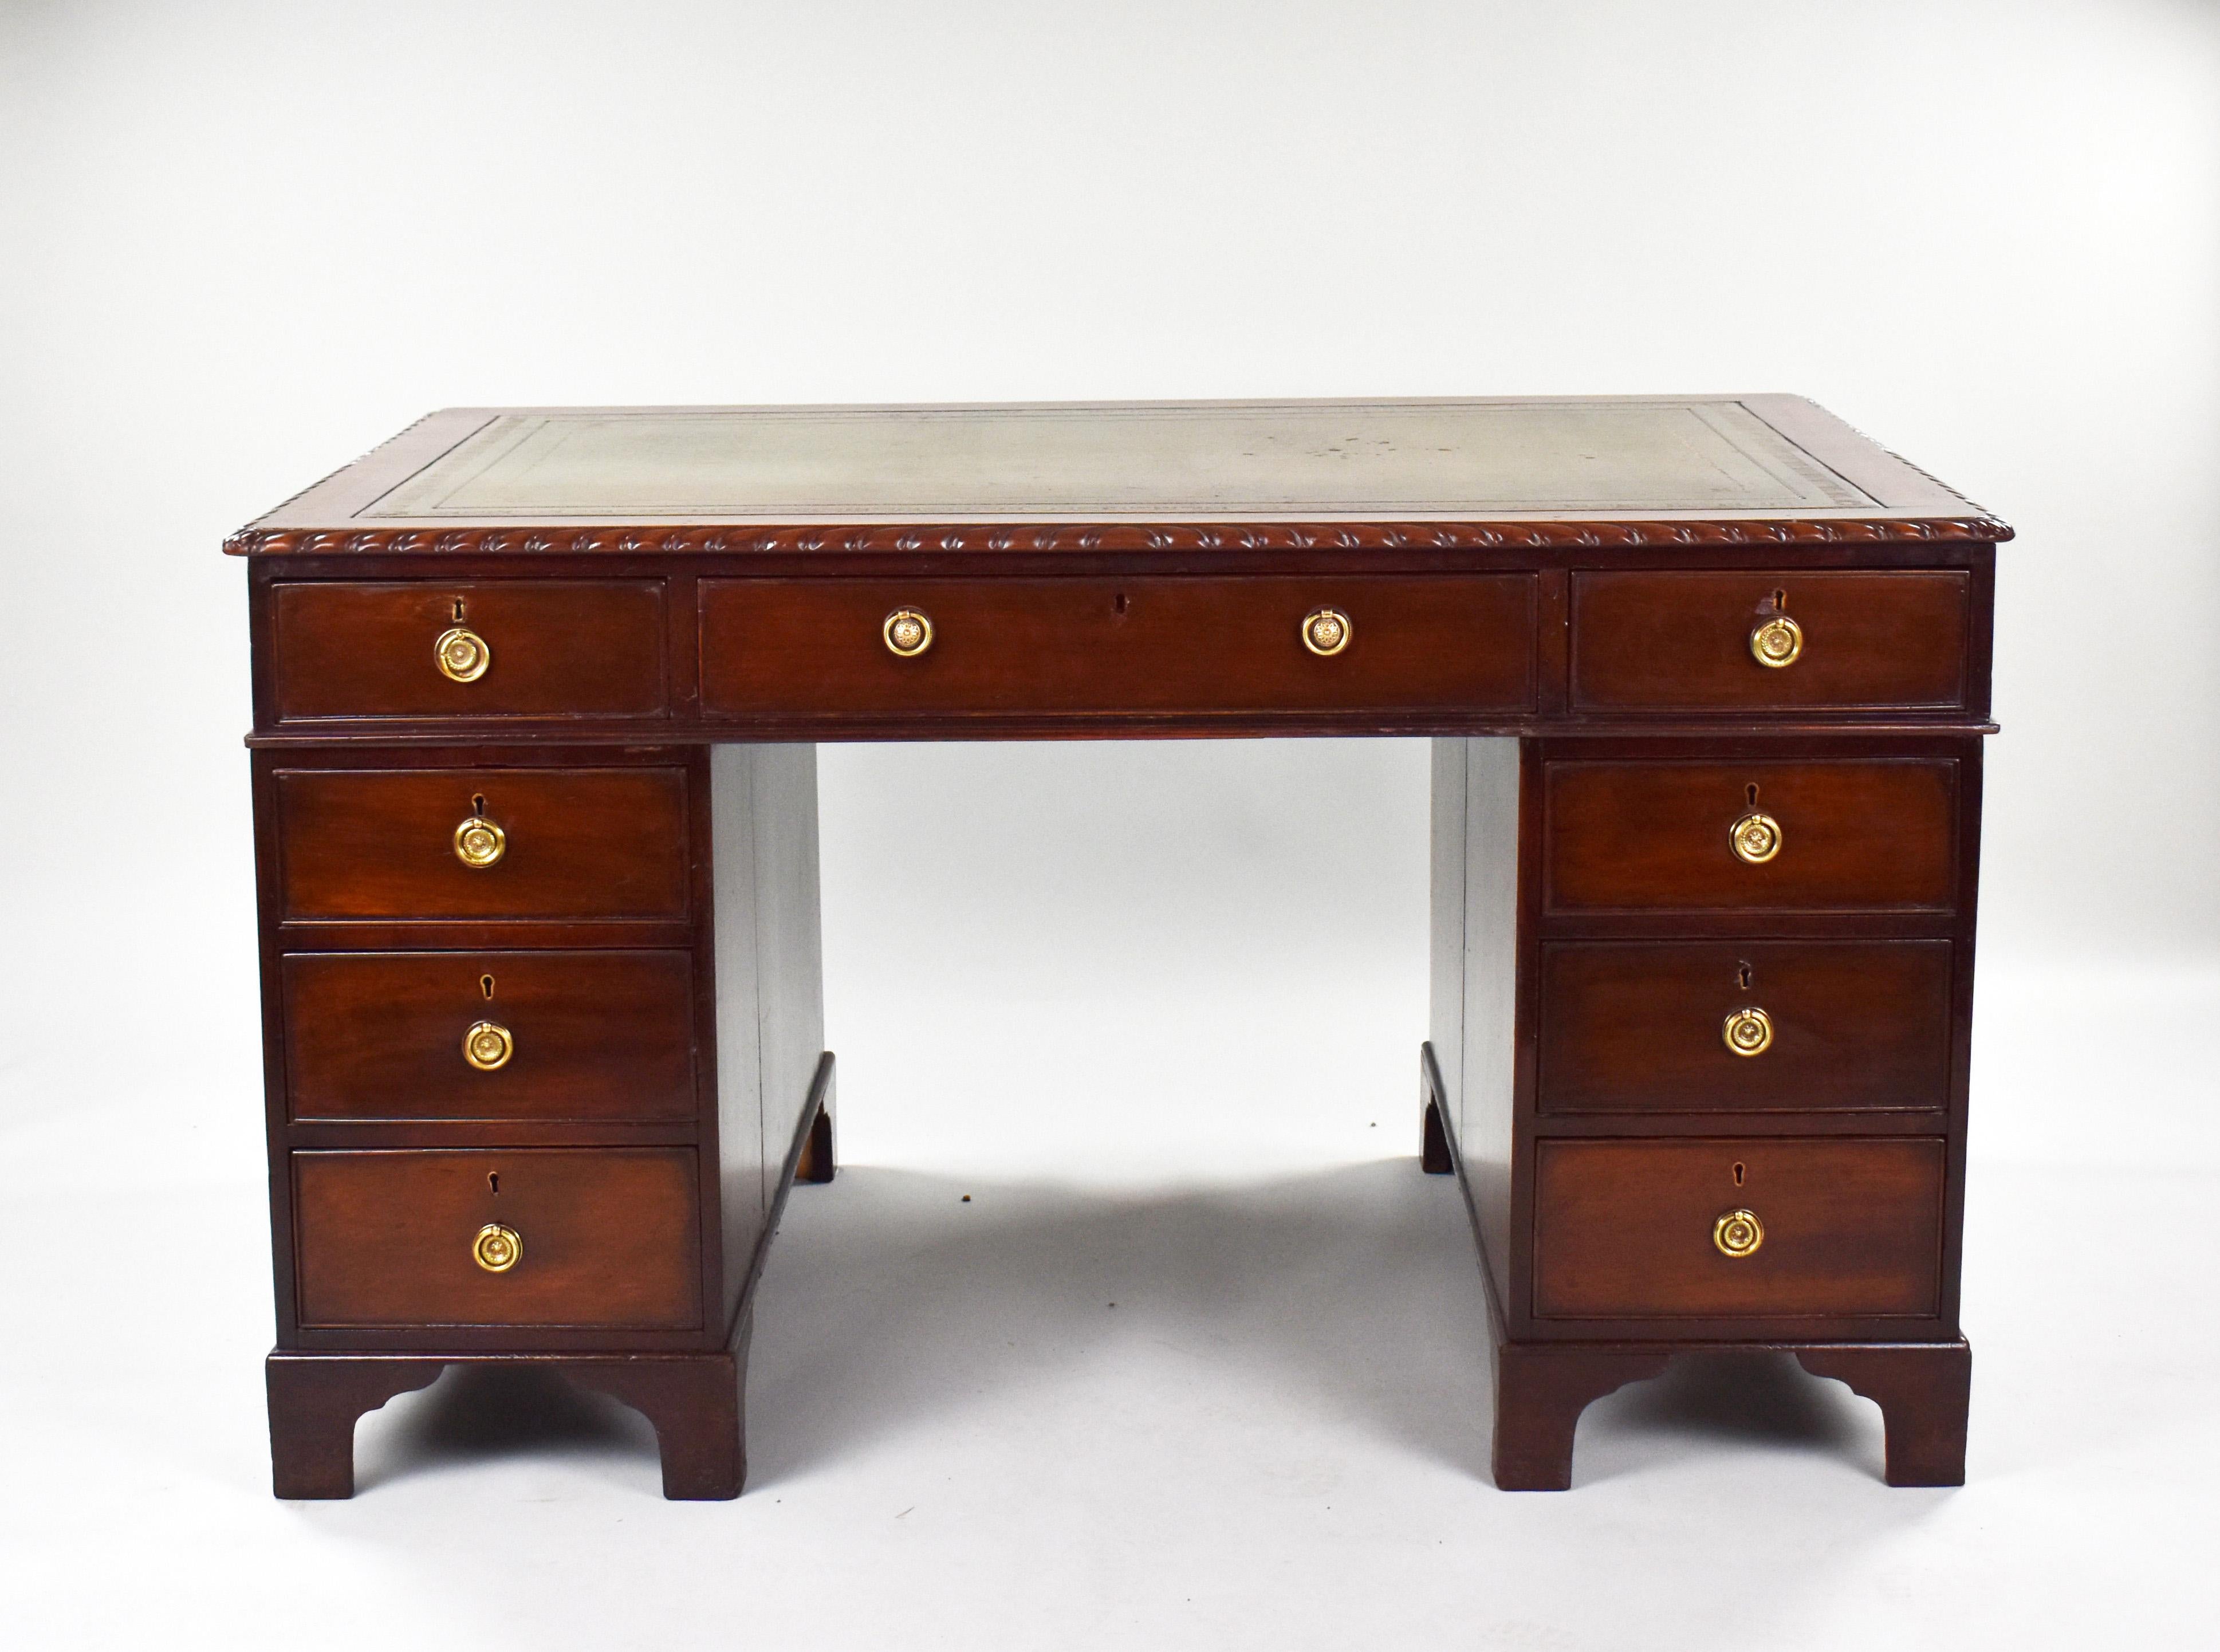 For sale is a Victorian mahogany partners desk. The top having green leather hide writing surface, decorated with blind and gold tooling. The top has three drawers to the front, and two long drawers on the opposing side. Fitting onto two pedestals,